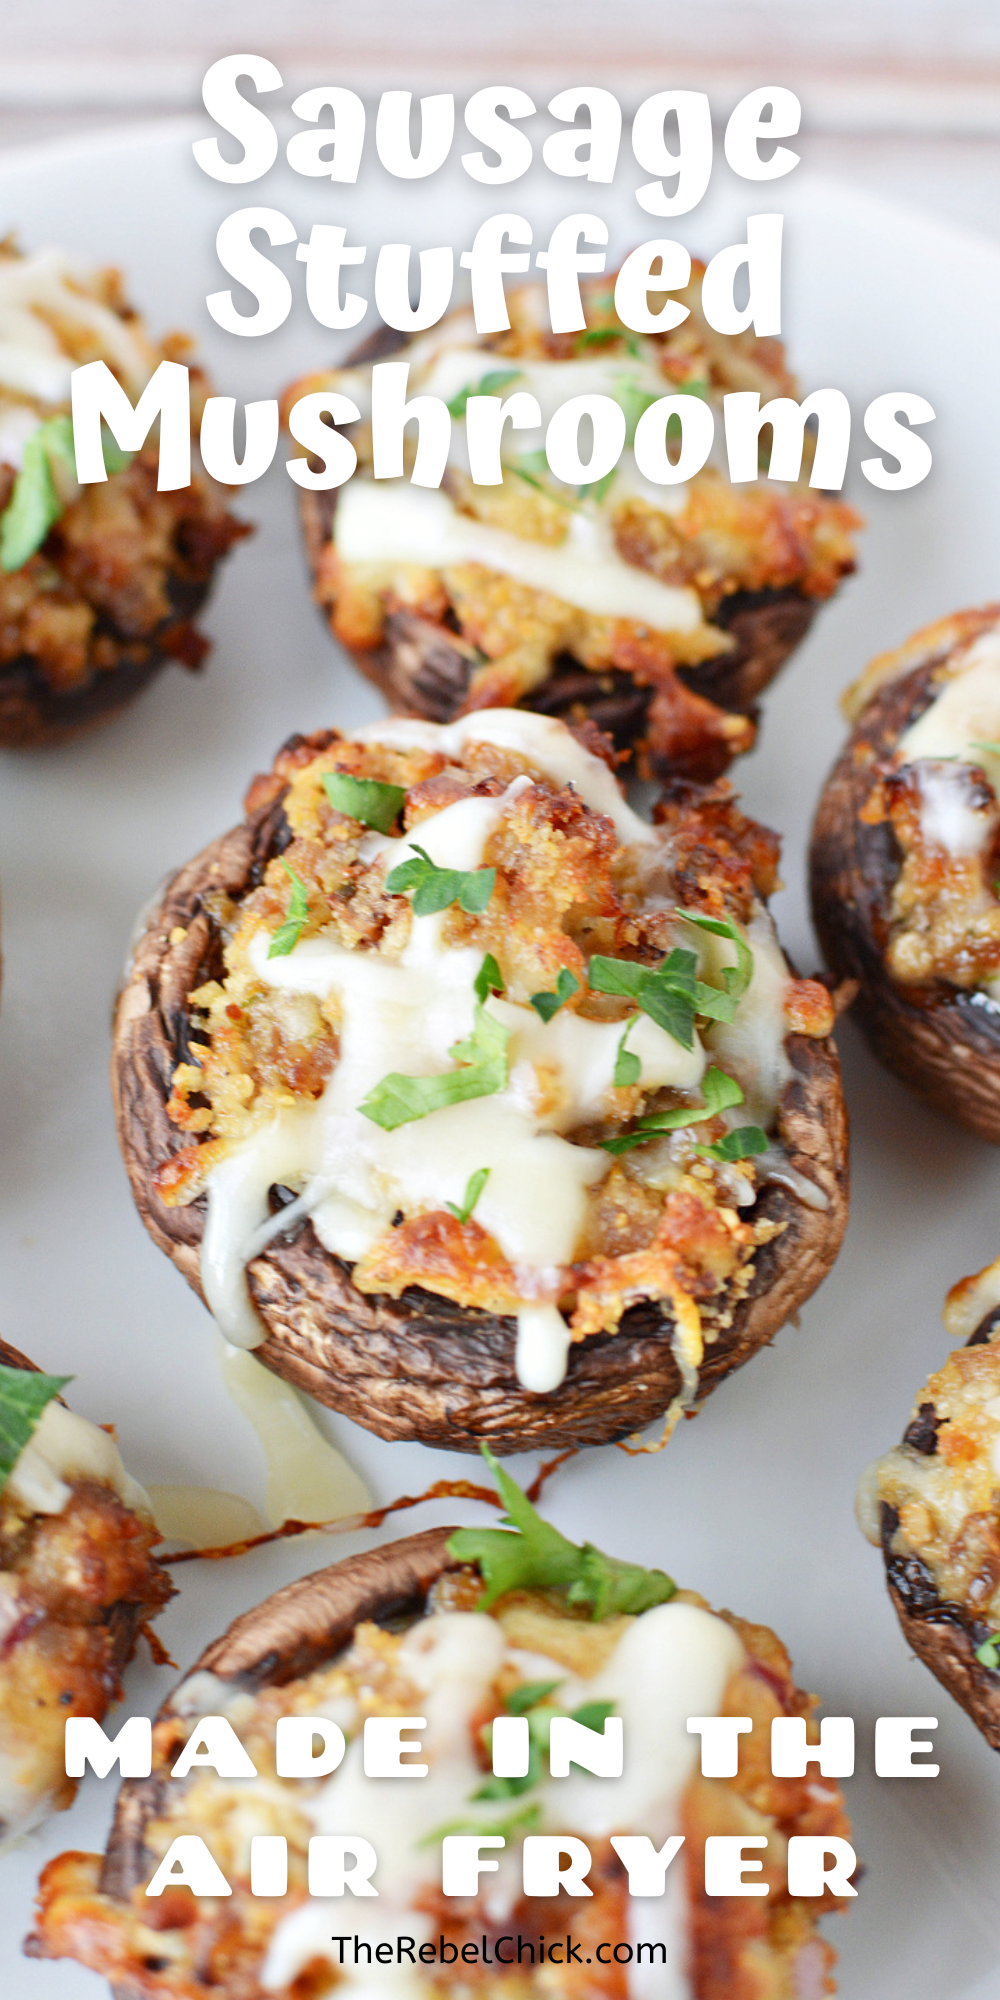 mushrooms stuffed with sausage and cheese melted on top